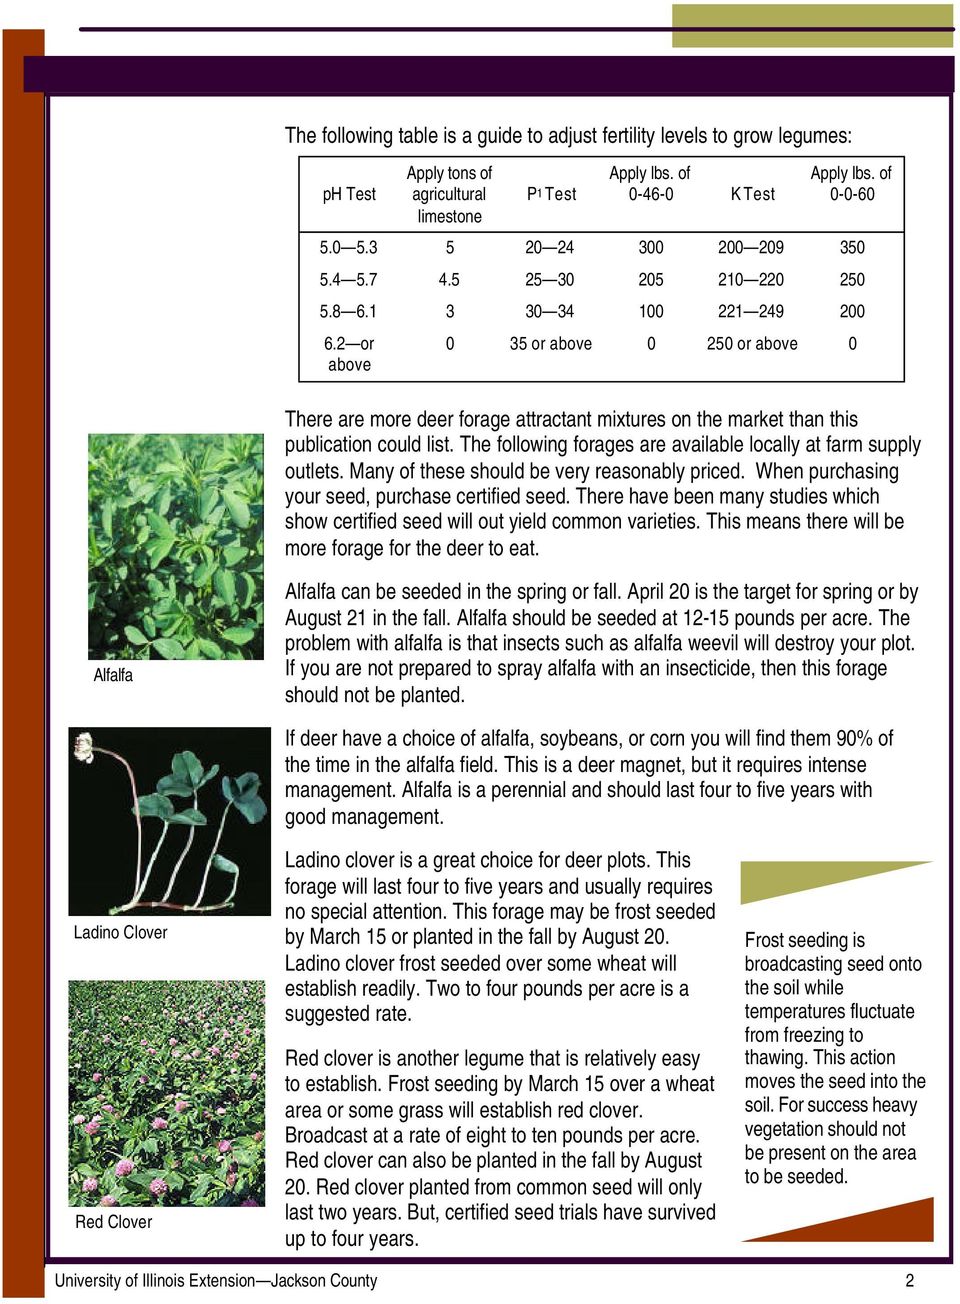 2 or above 0 35 or above 0 250 or above 0 There are more deer forage attractant mixtures on the market than this publication could list.